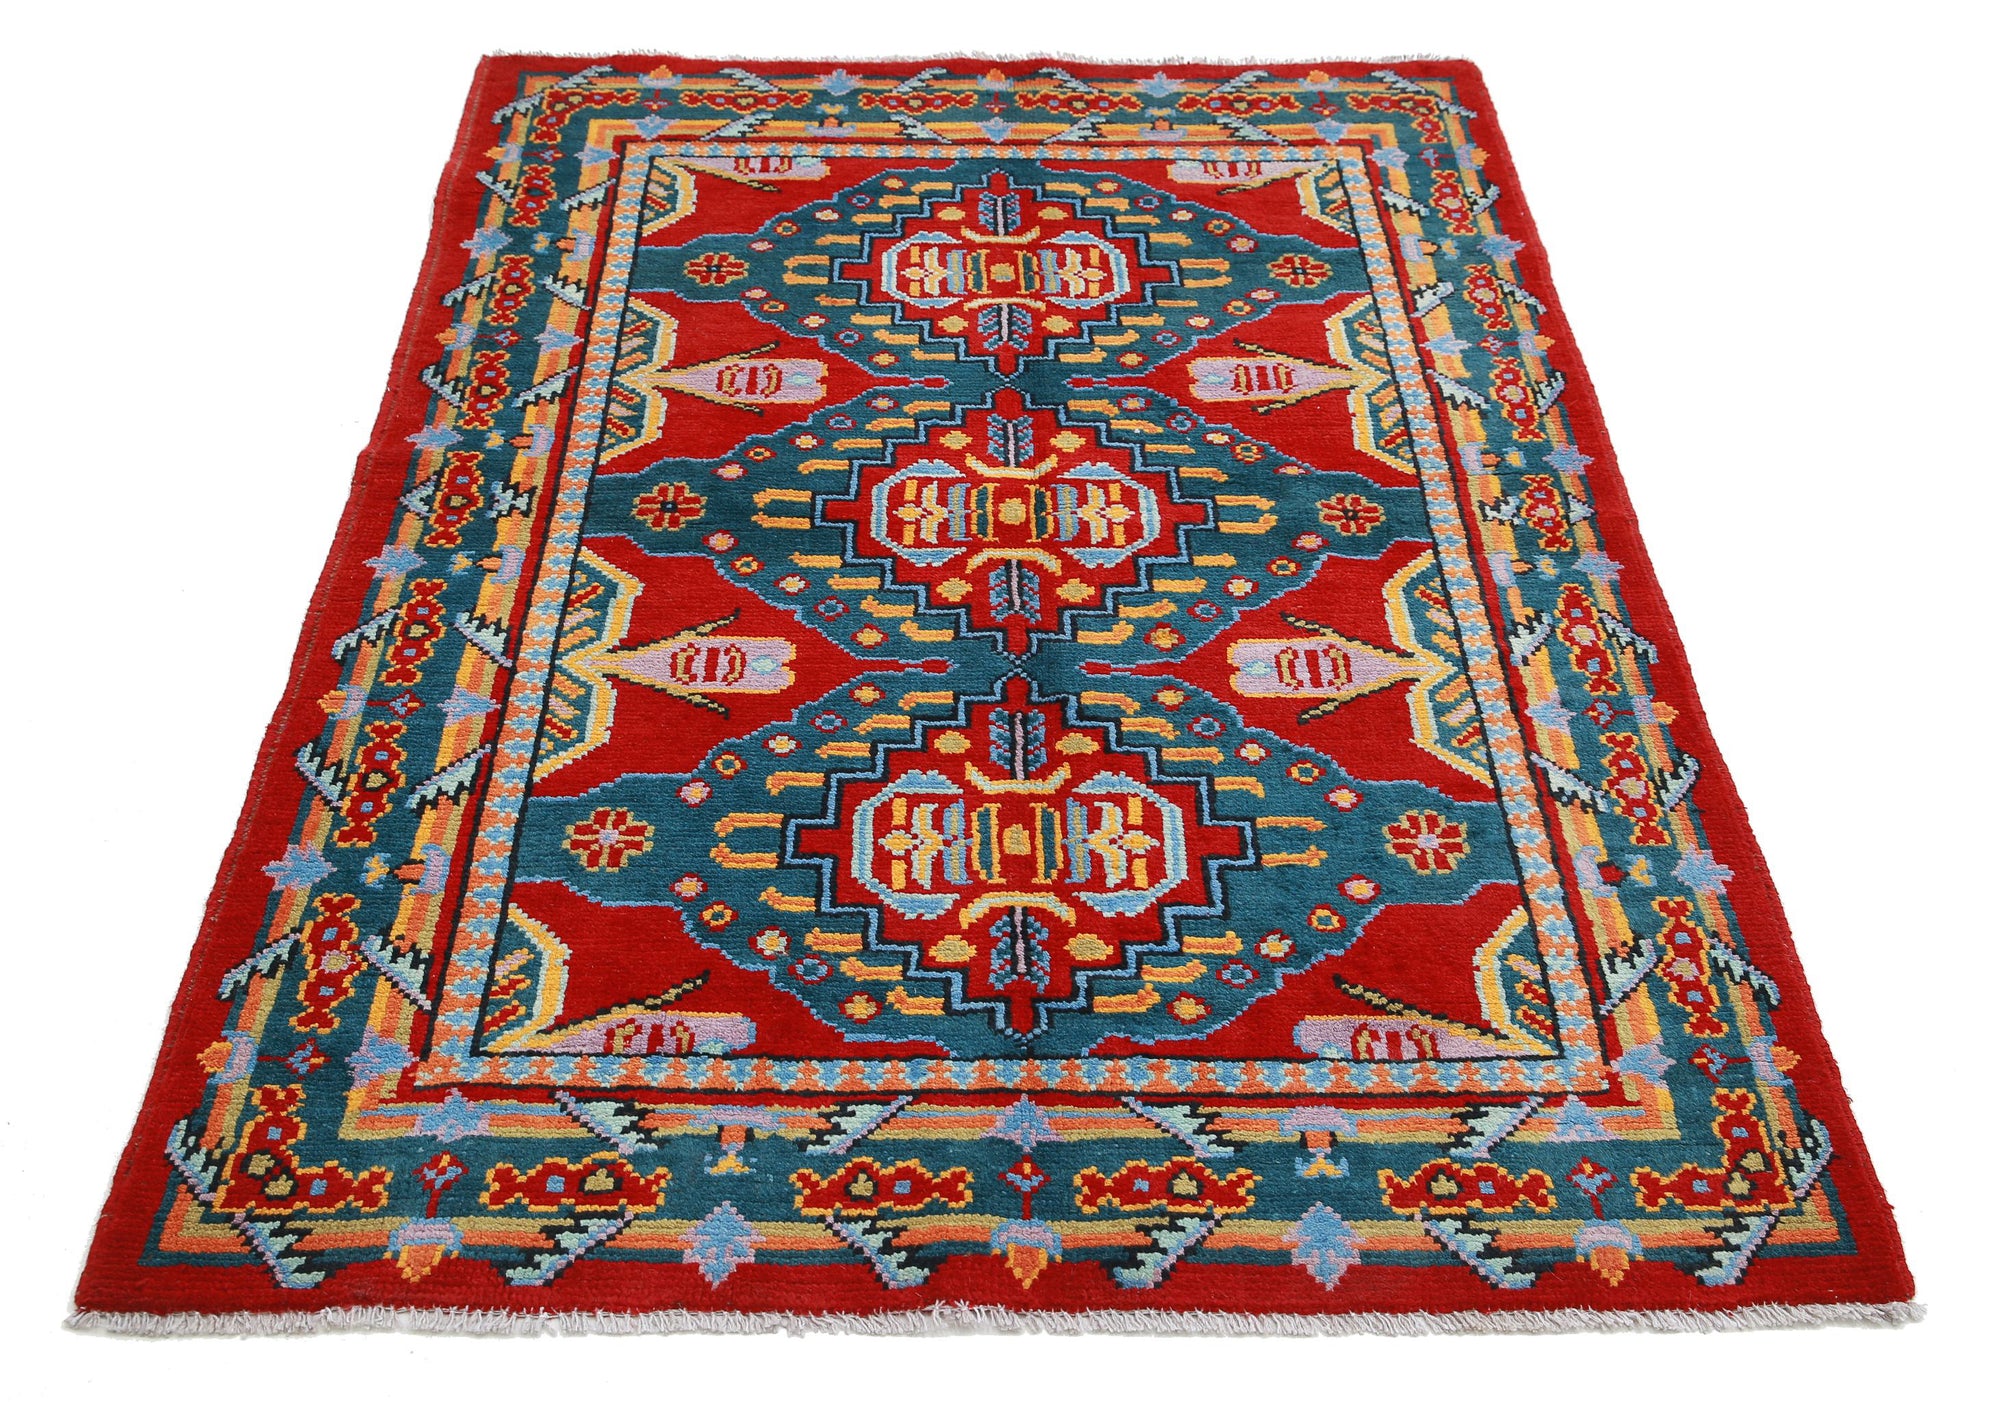 Revival-hand-knotted-qarghani-wool-rug-5014210-3.jpg